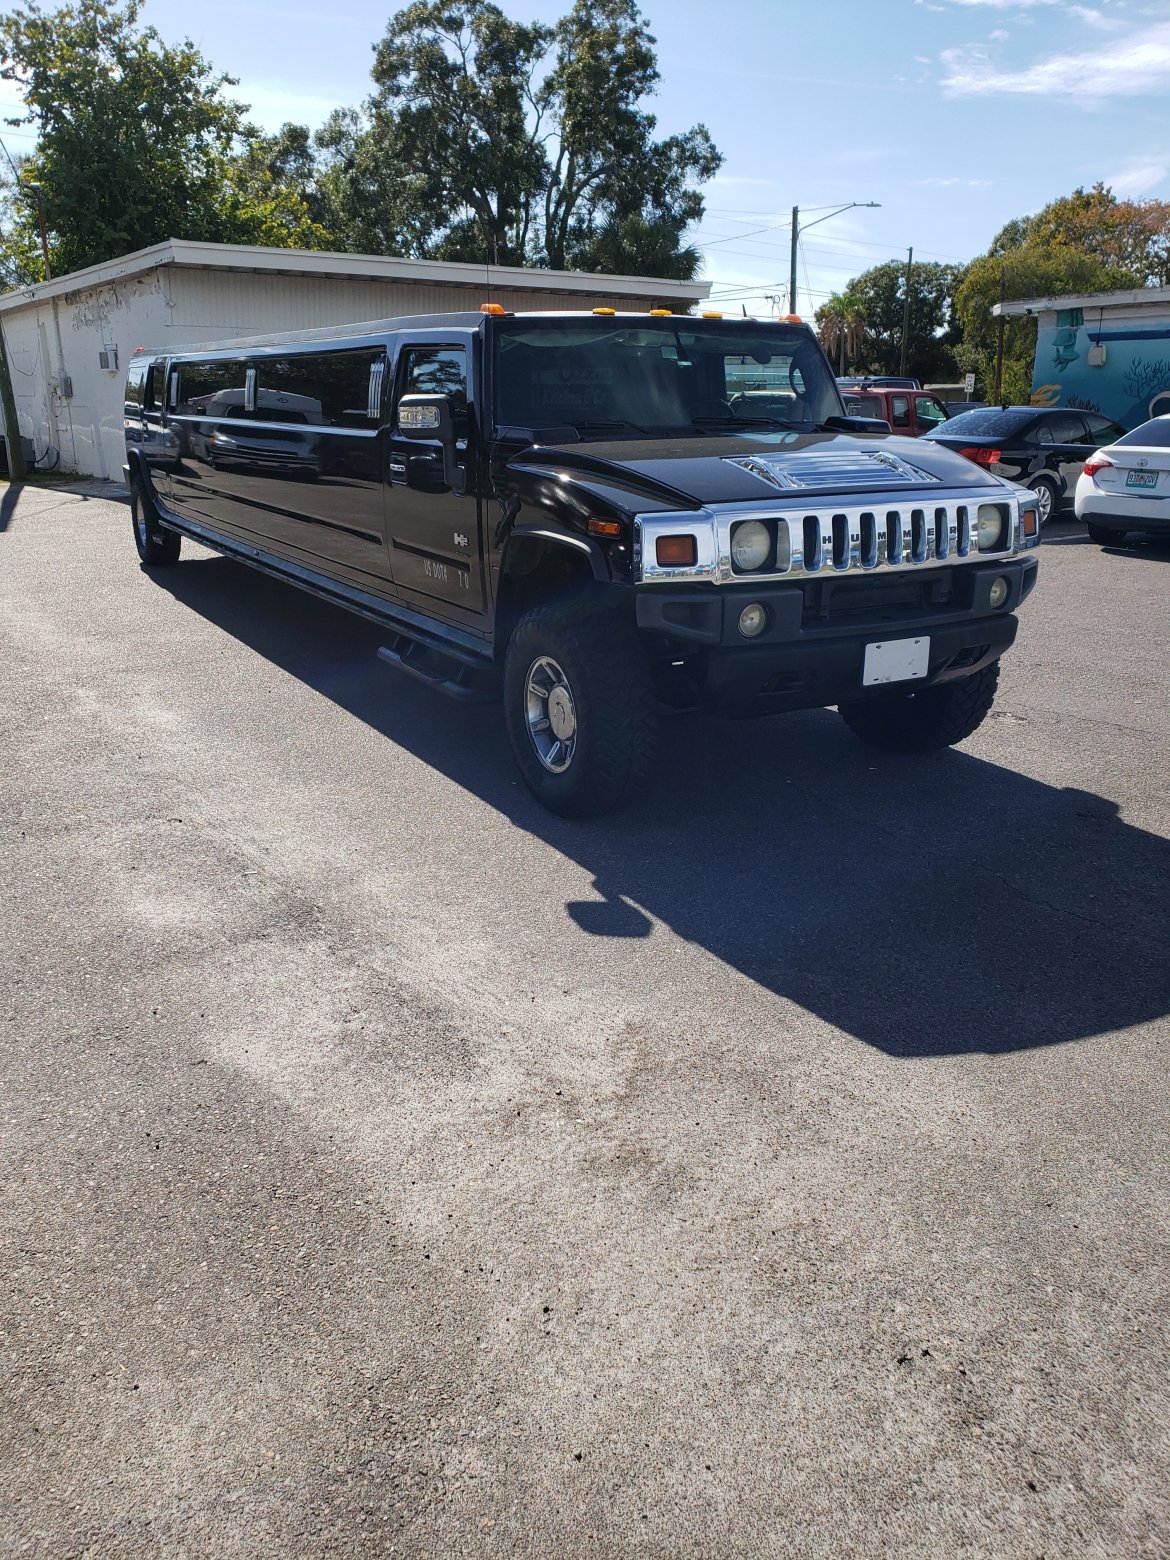 SUV Stretch for sale: 2007 Hummer H2 200&quot; 200&quot; by Krystal Coachworks